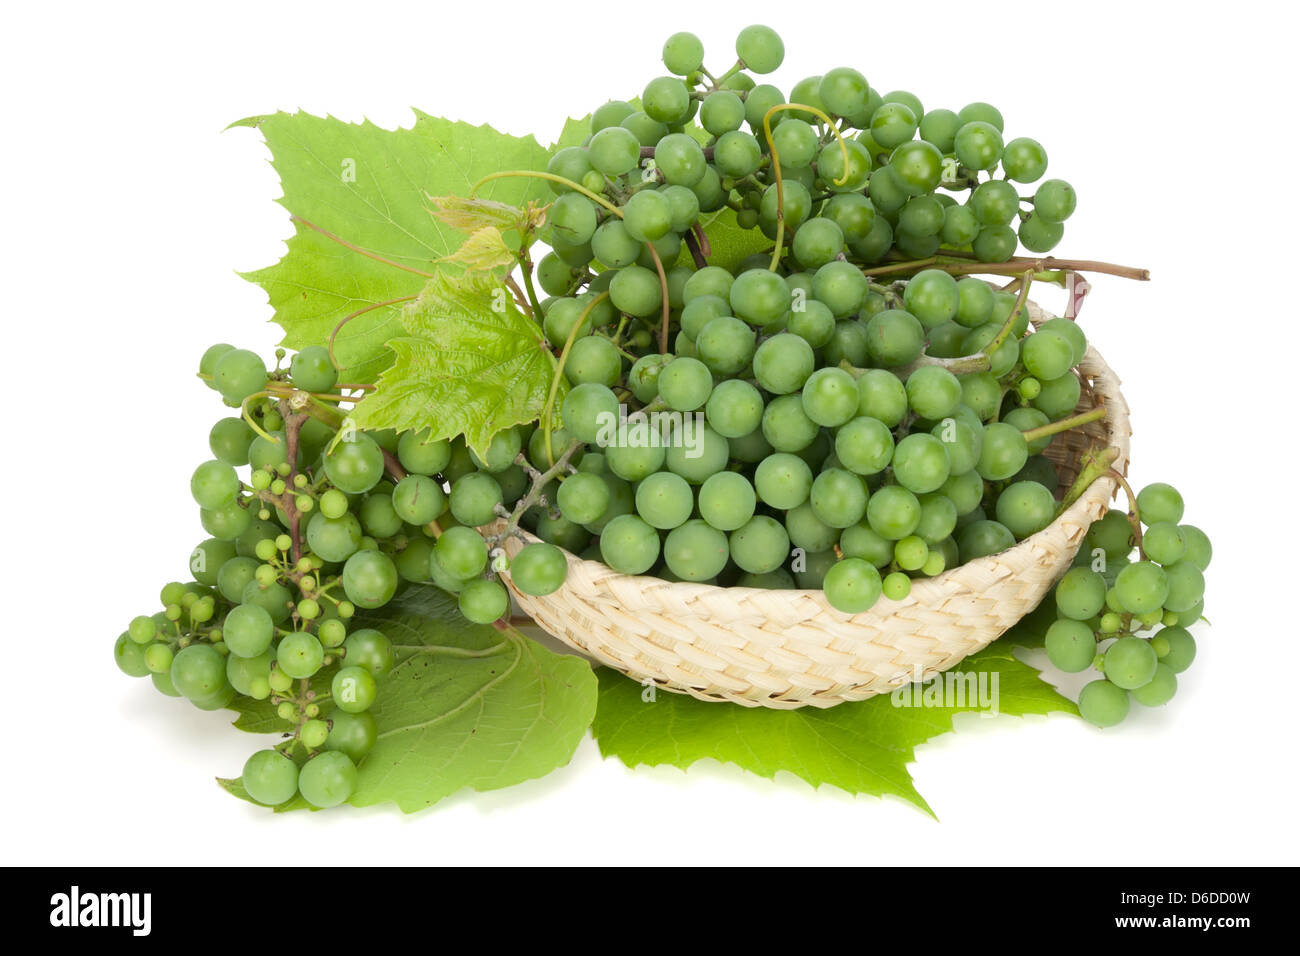 green grapes lie in a basket Stock Photo